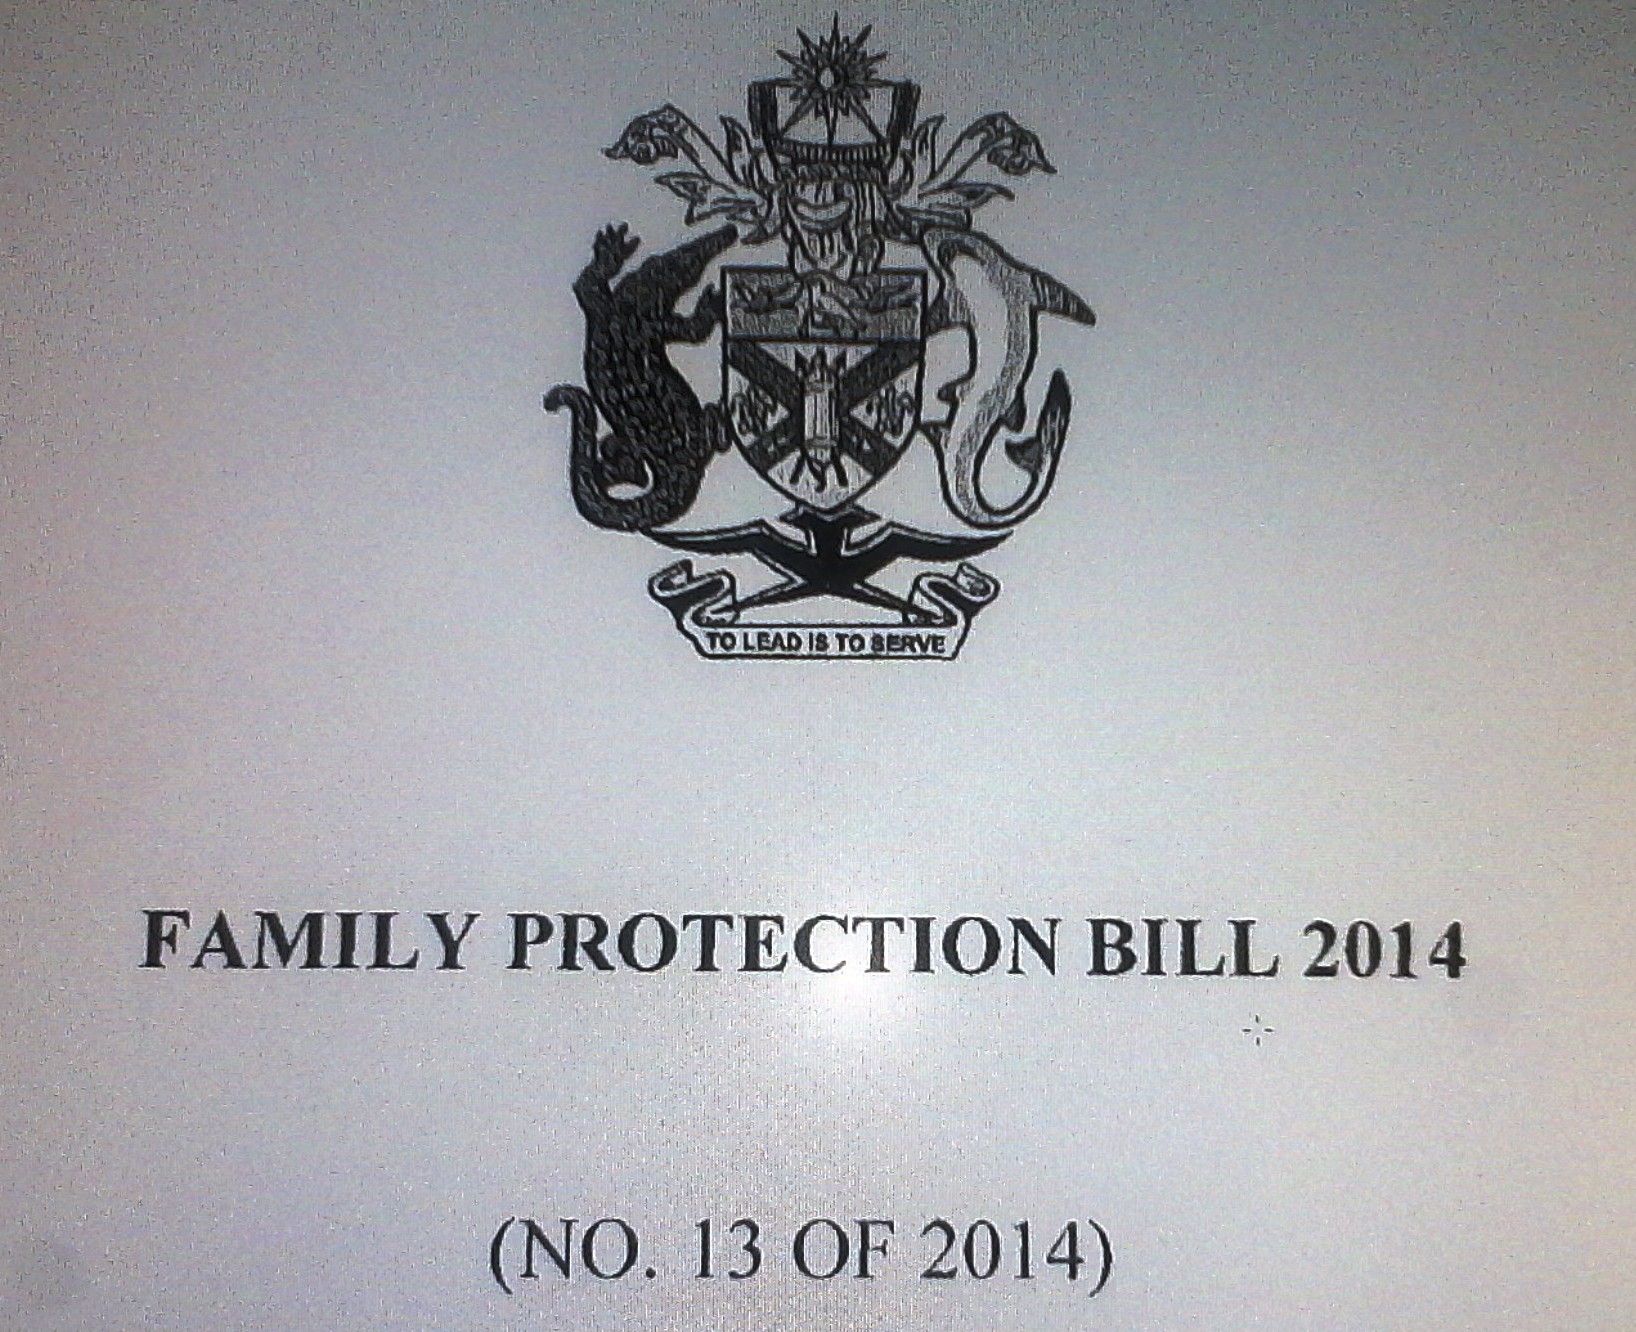 Claims by family members under the Family Protection Act